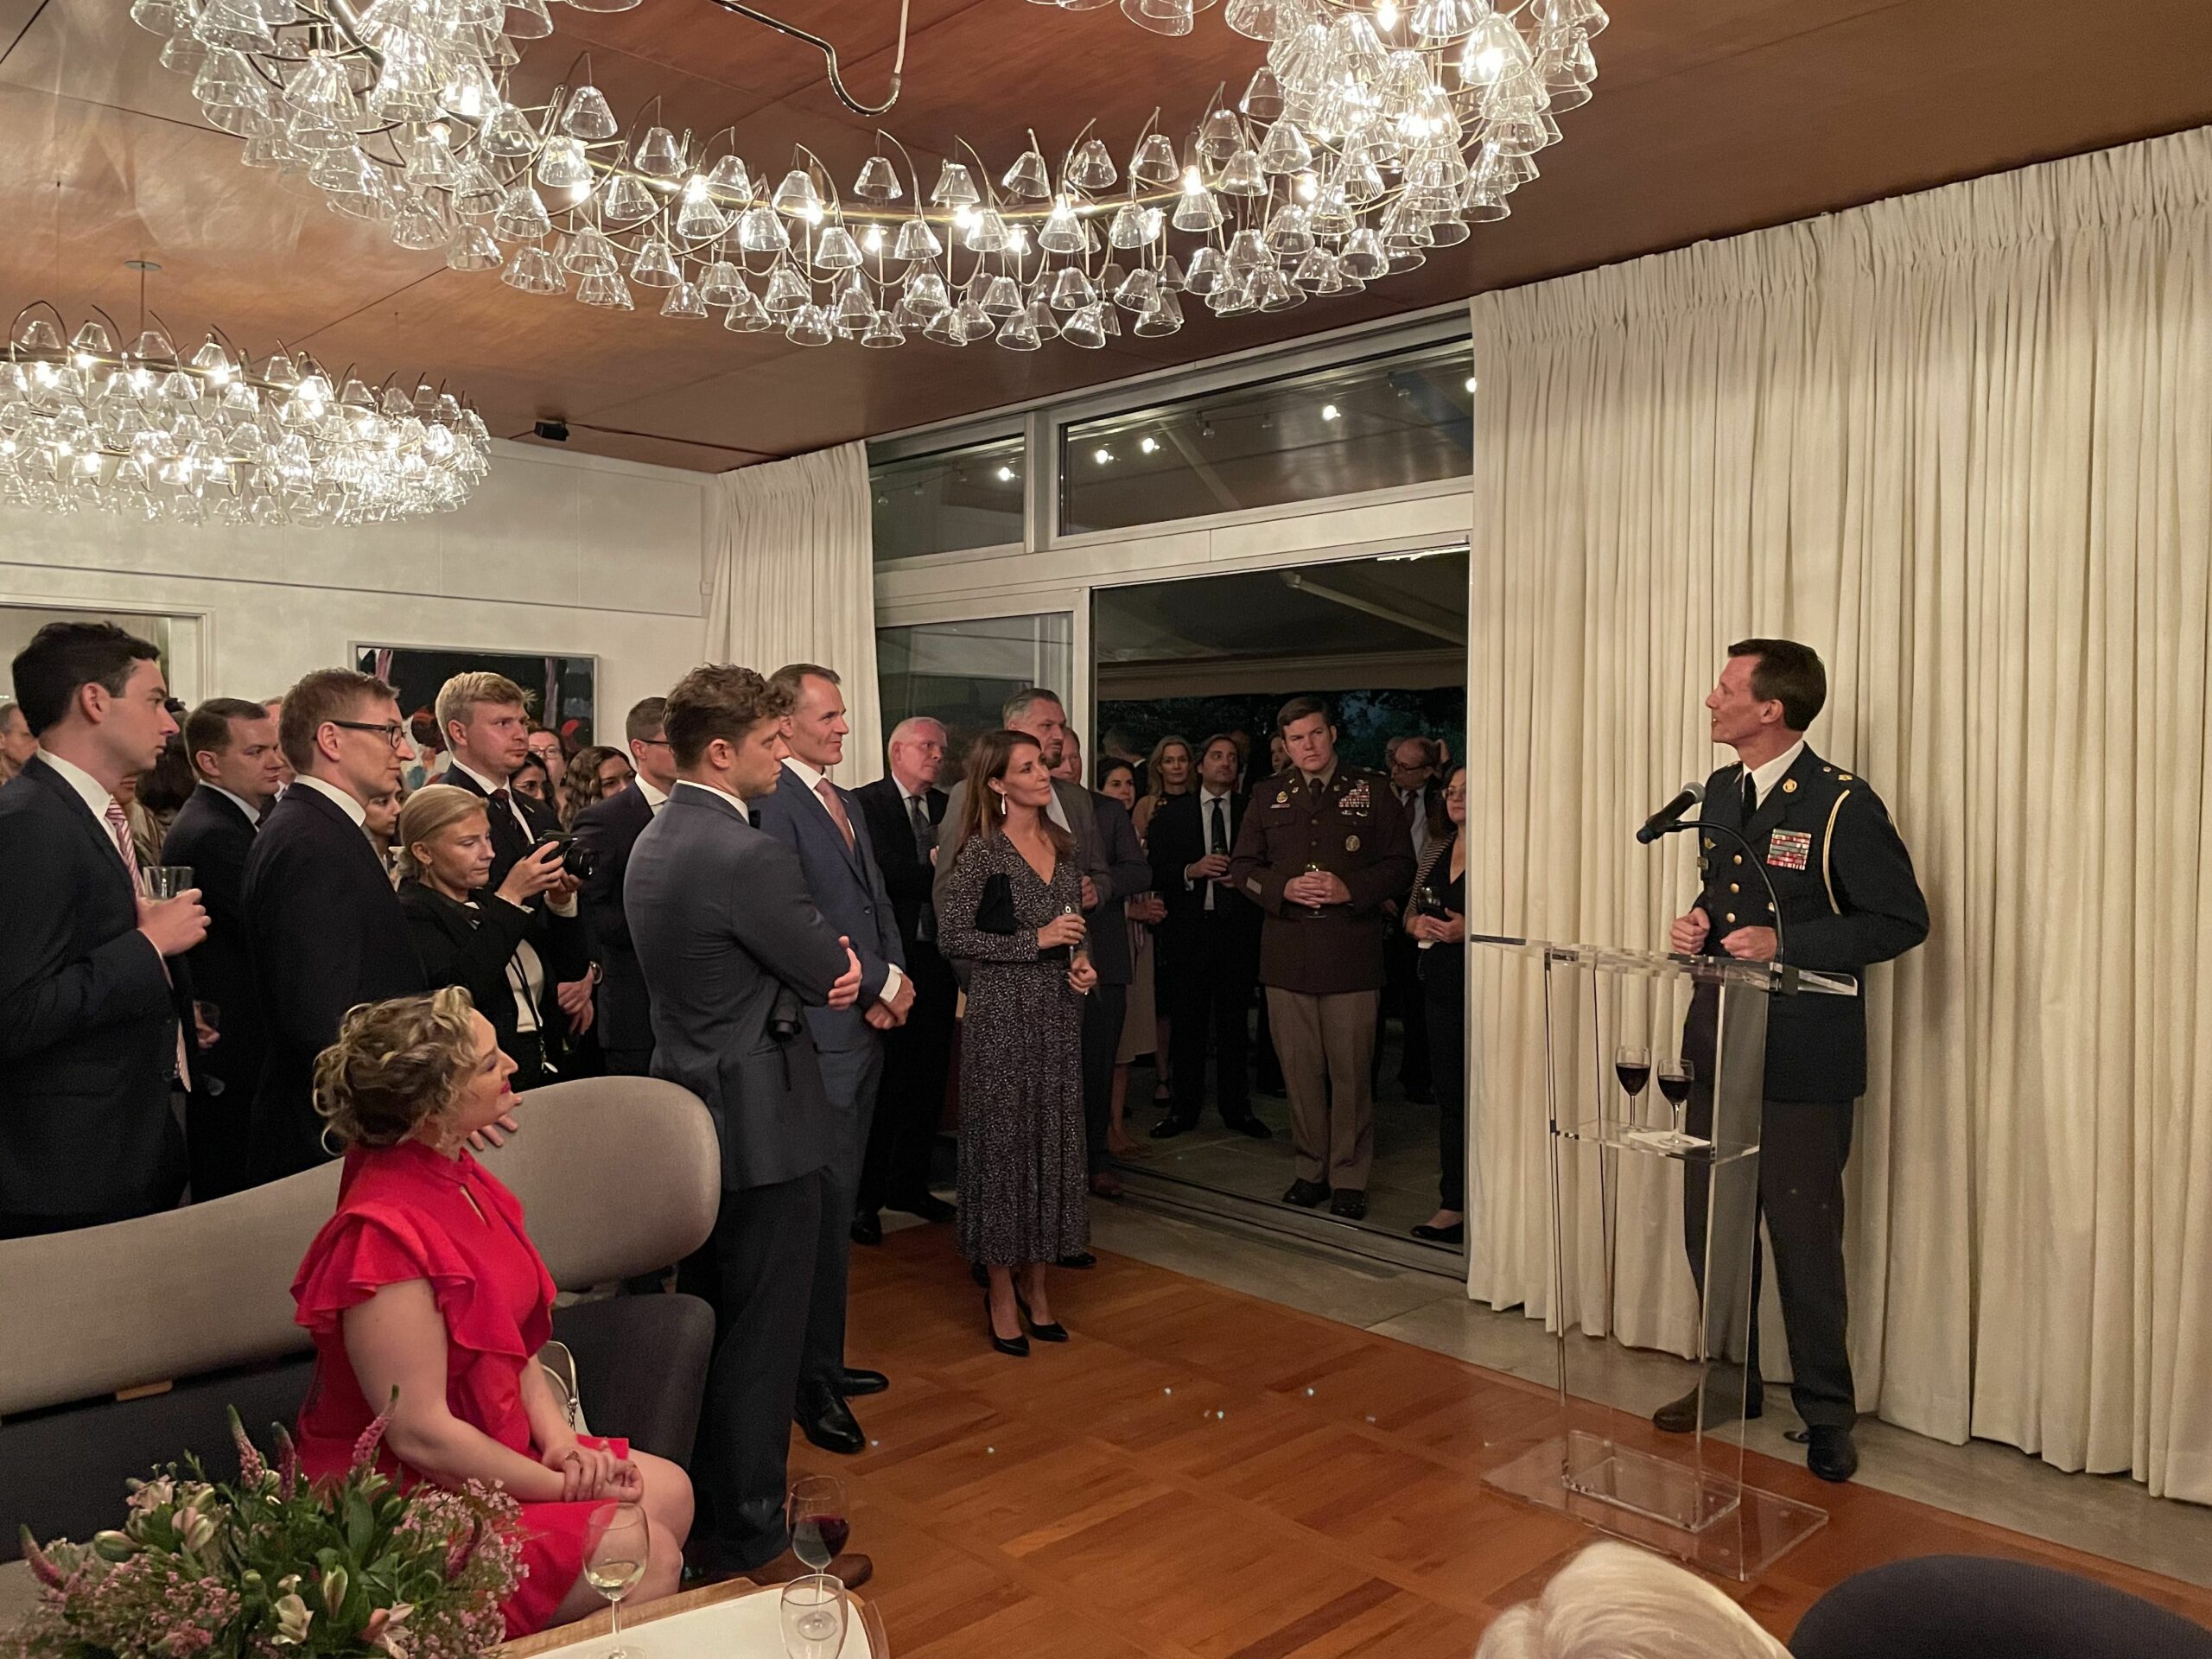 Reception for the New Ambassador of Denmark to the United States